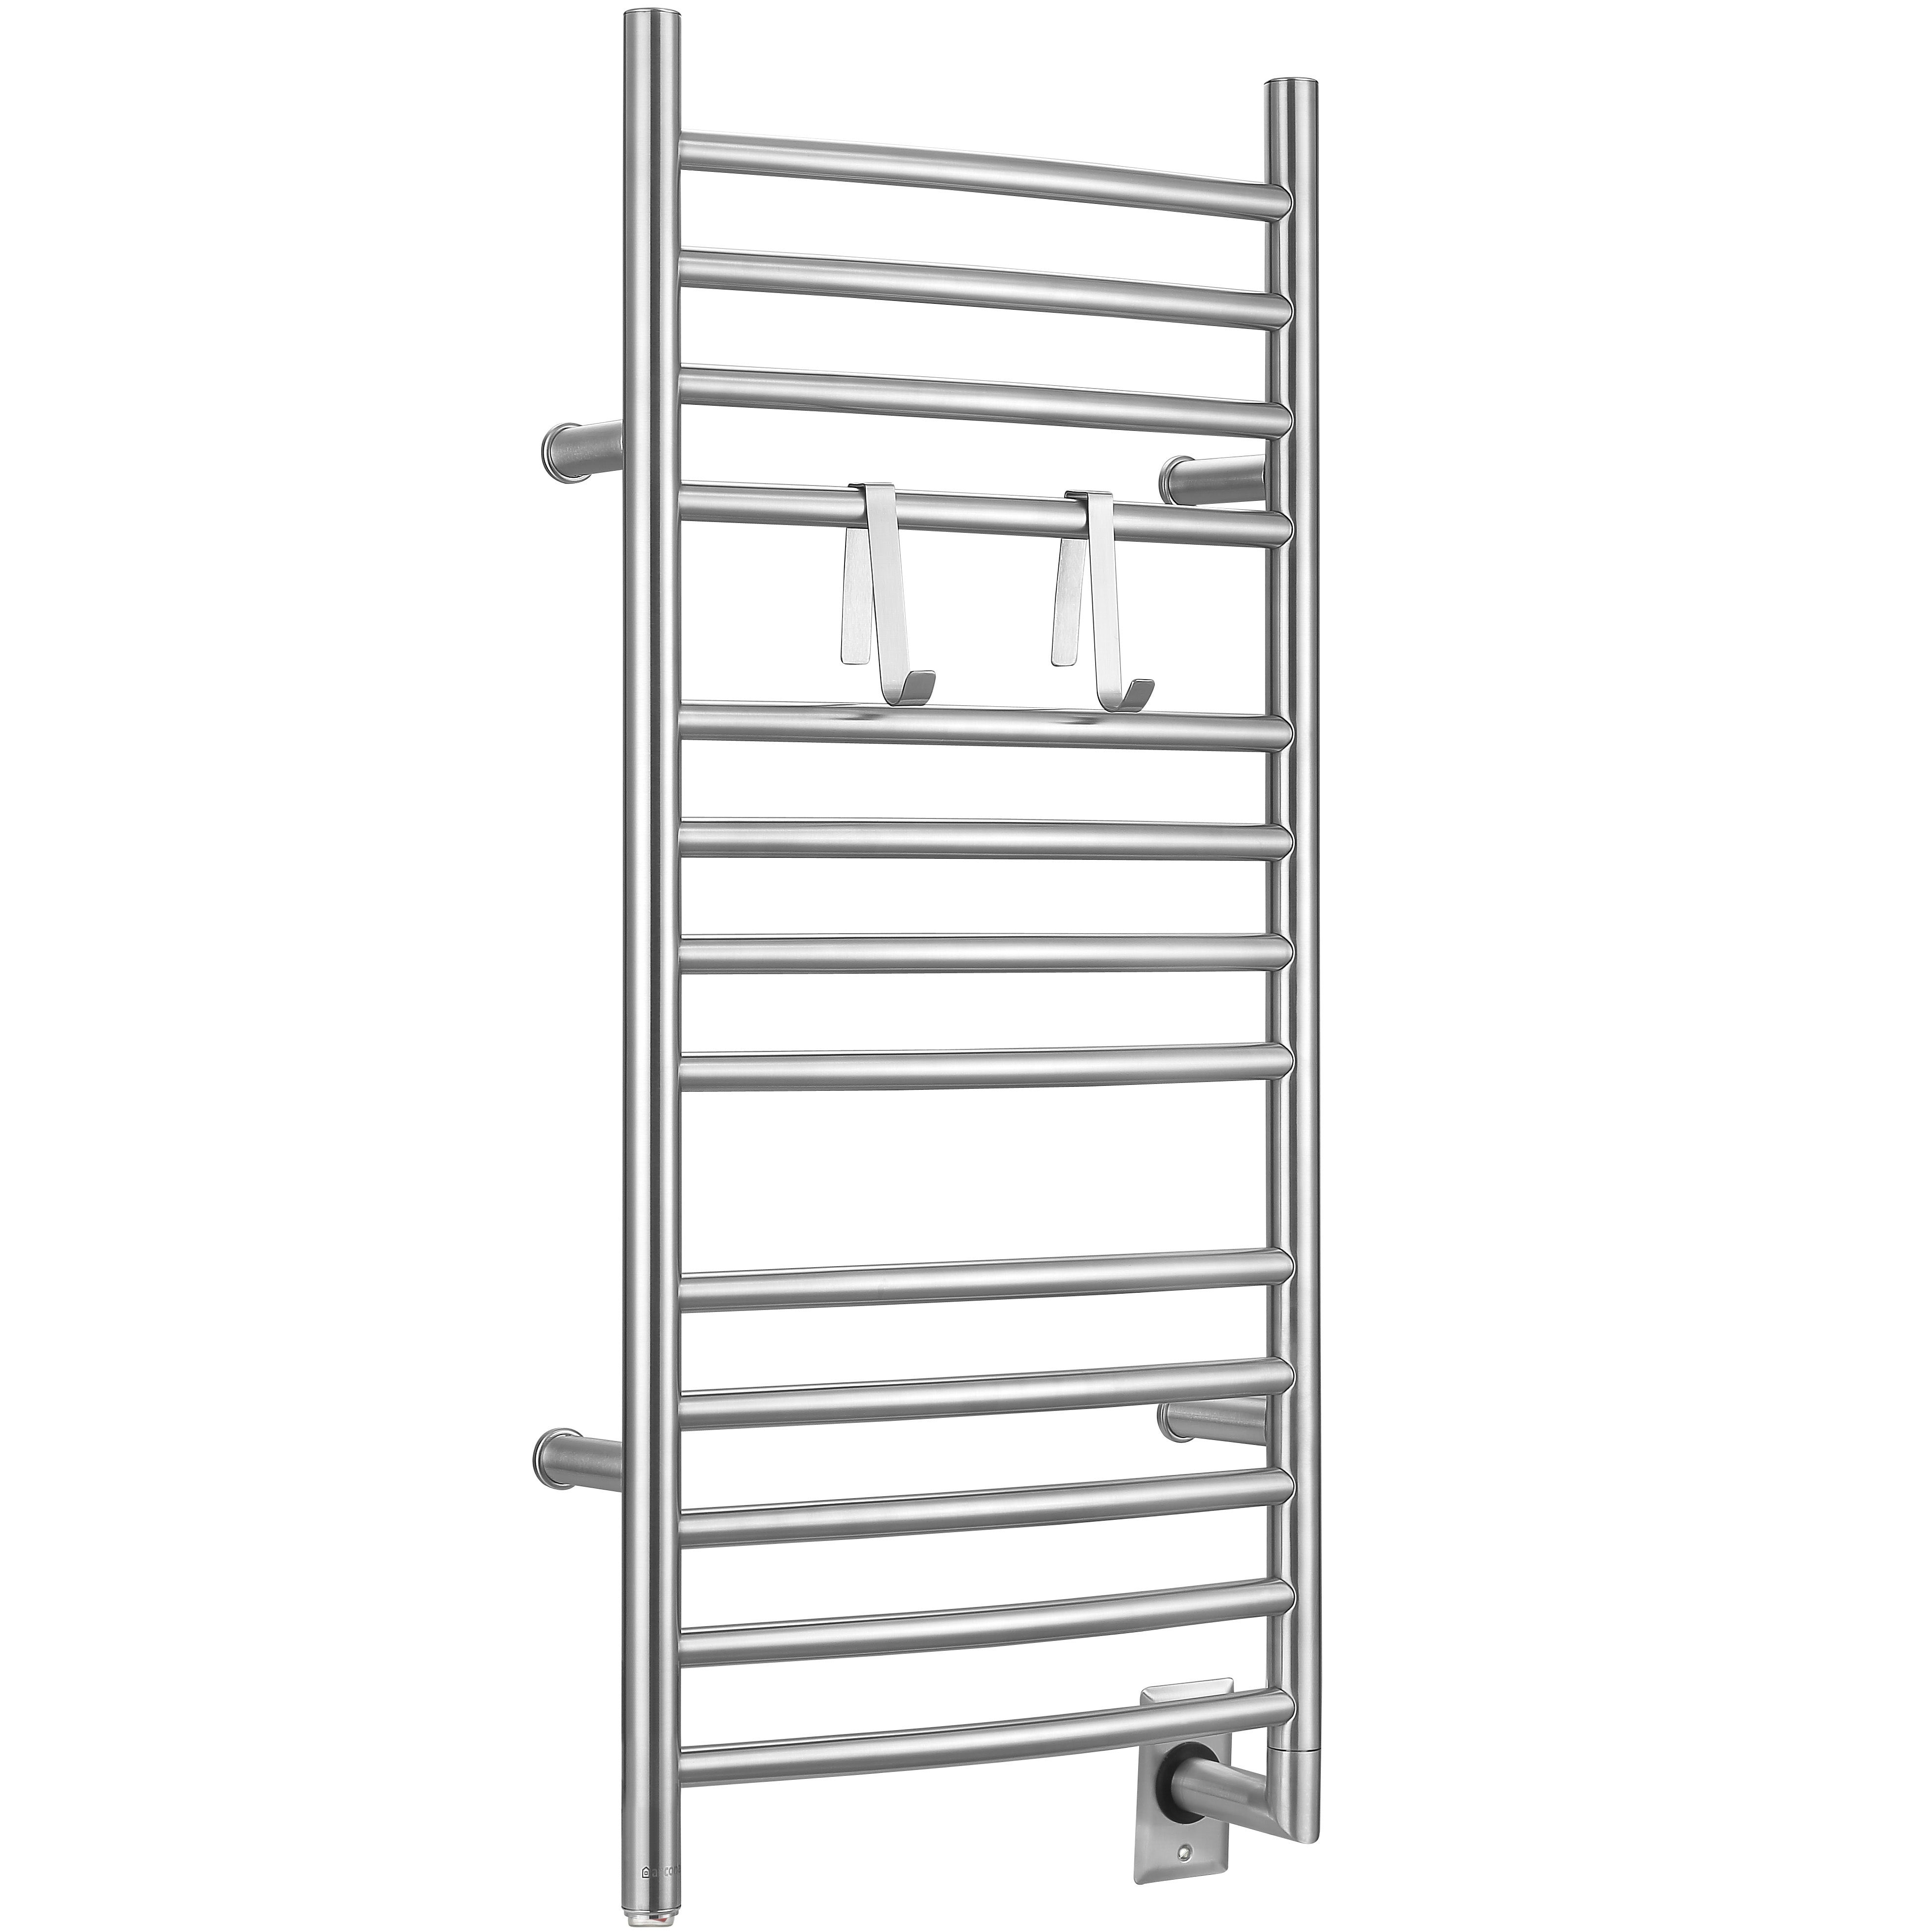 Ancona Svelte Rounded 13-Bar Hardwired Towel Warmer with 2 Adjustable Hooks in Brushed Stainless Steel